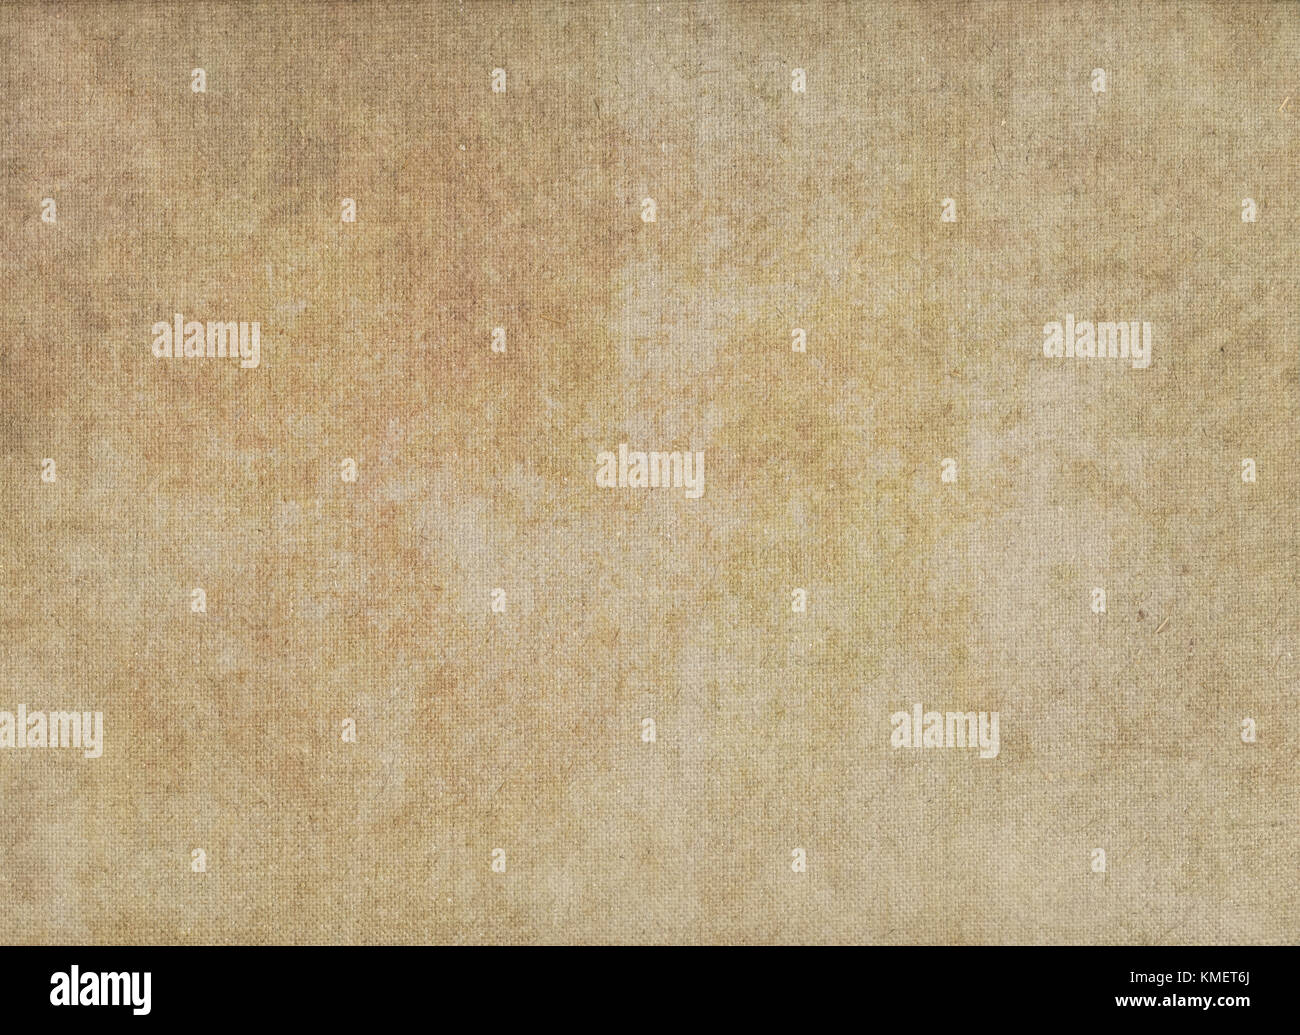 Old dirty canvas texture or background for the design. Natural linen material. Stock Photo